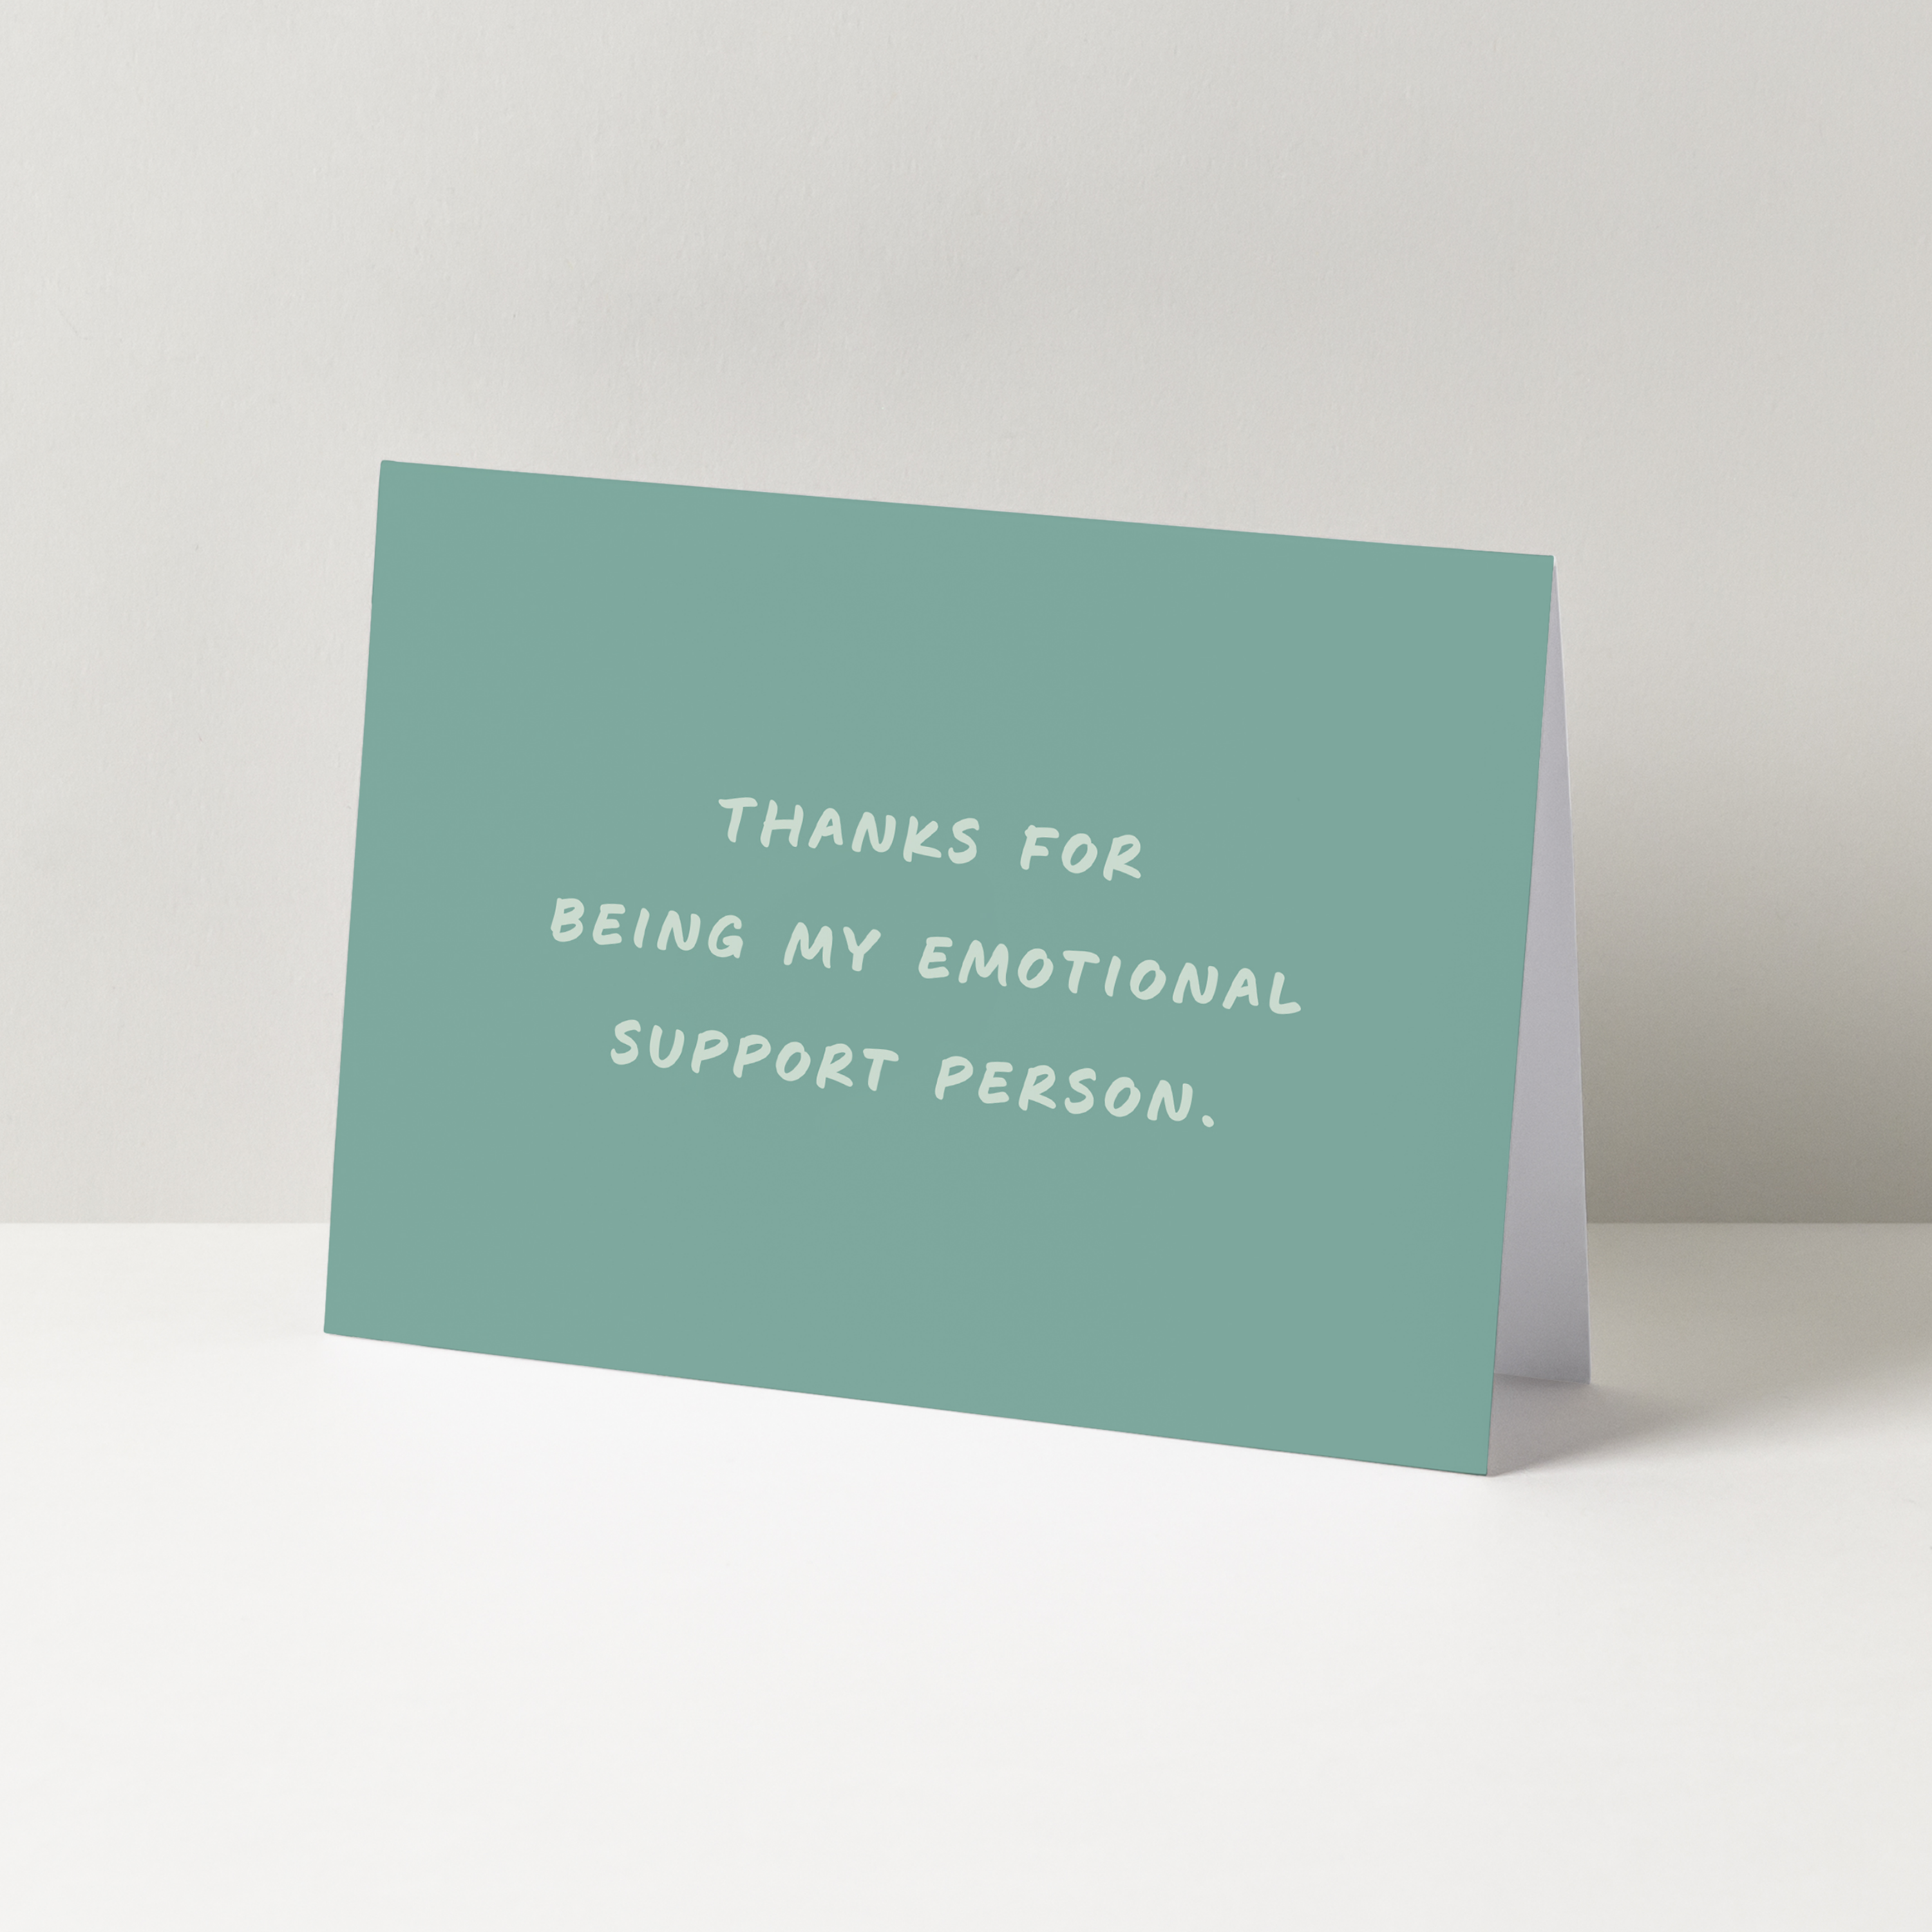 Horizontal mint colored card with "Thanks for being my emotional support person" in a handwritten font.